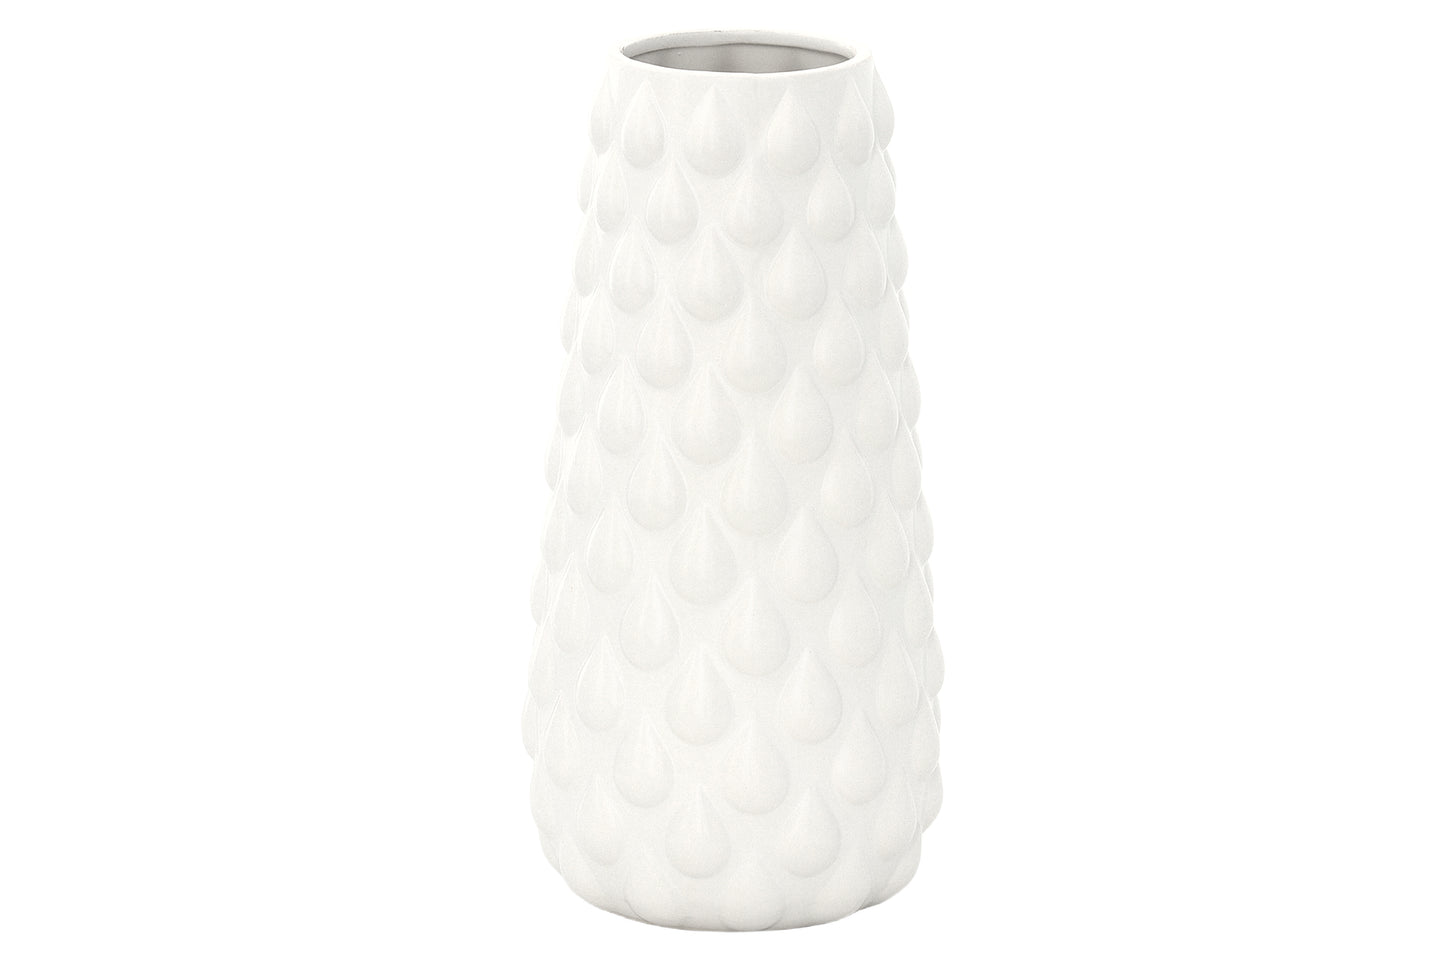 Ceramic Round Vase with Embossed Water Drops Pattern and Flared Bottom Design Body Matte Finish White